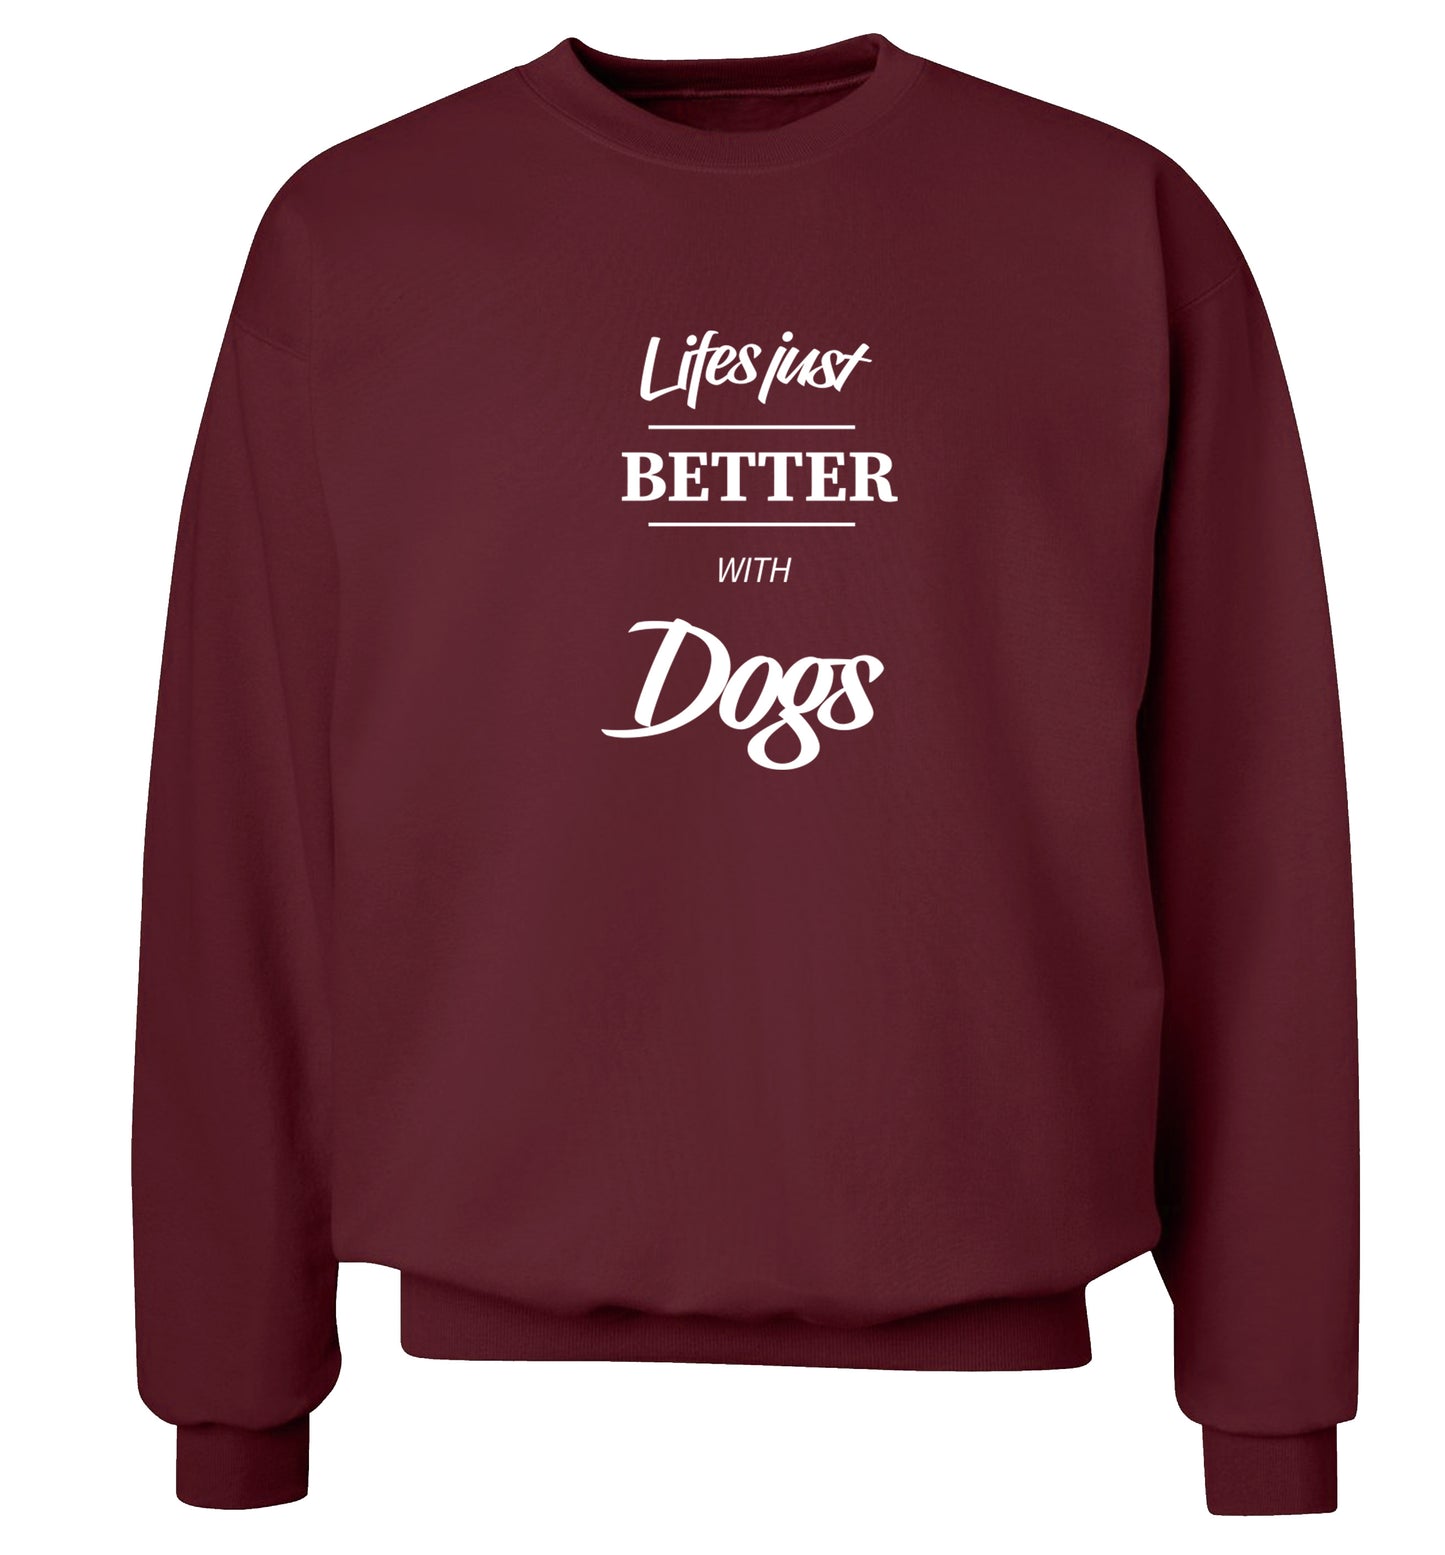 life is better with dogs Adult's unisex maroon Sweater 2XL